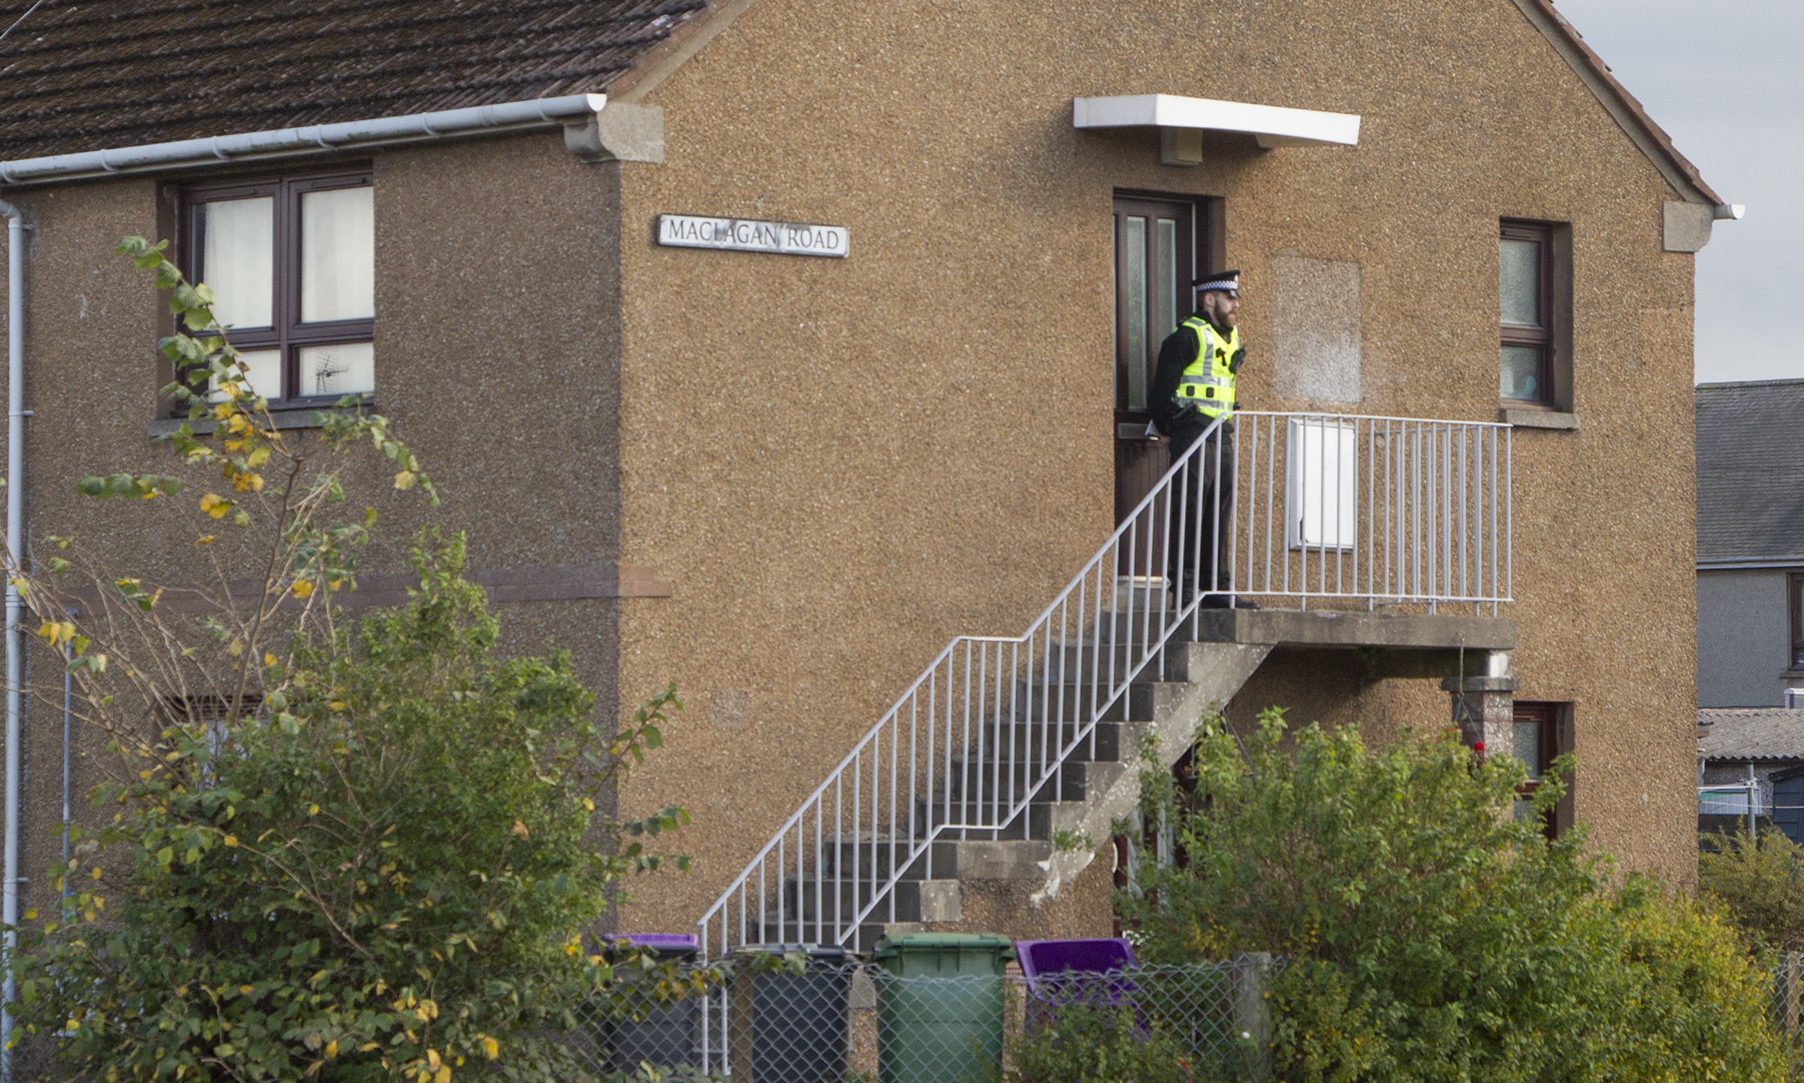 A police presence remained at a flat in Maclagan Road, Carnoustie.